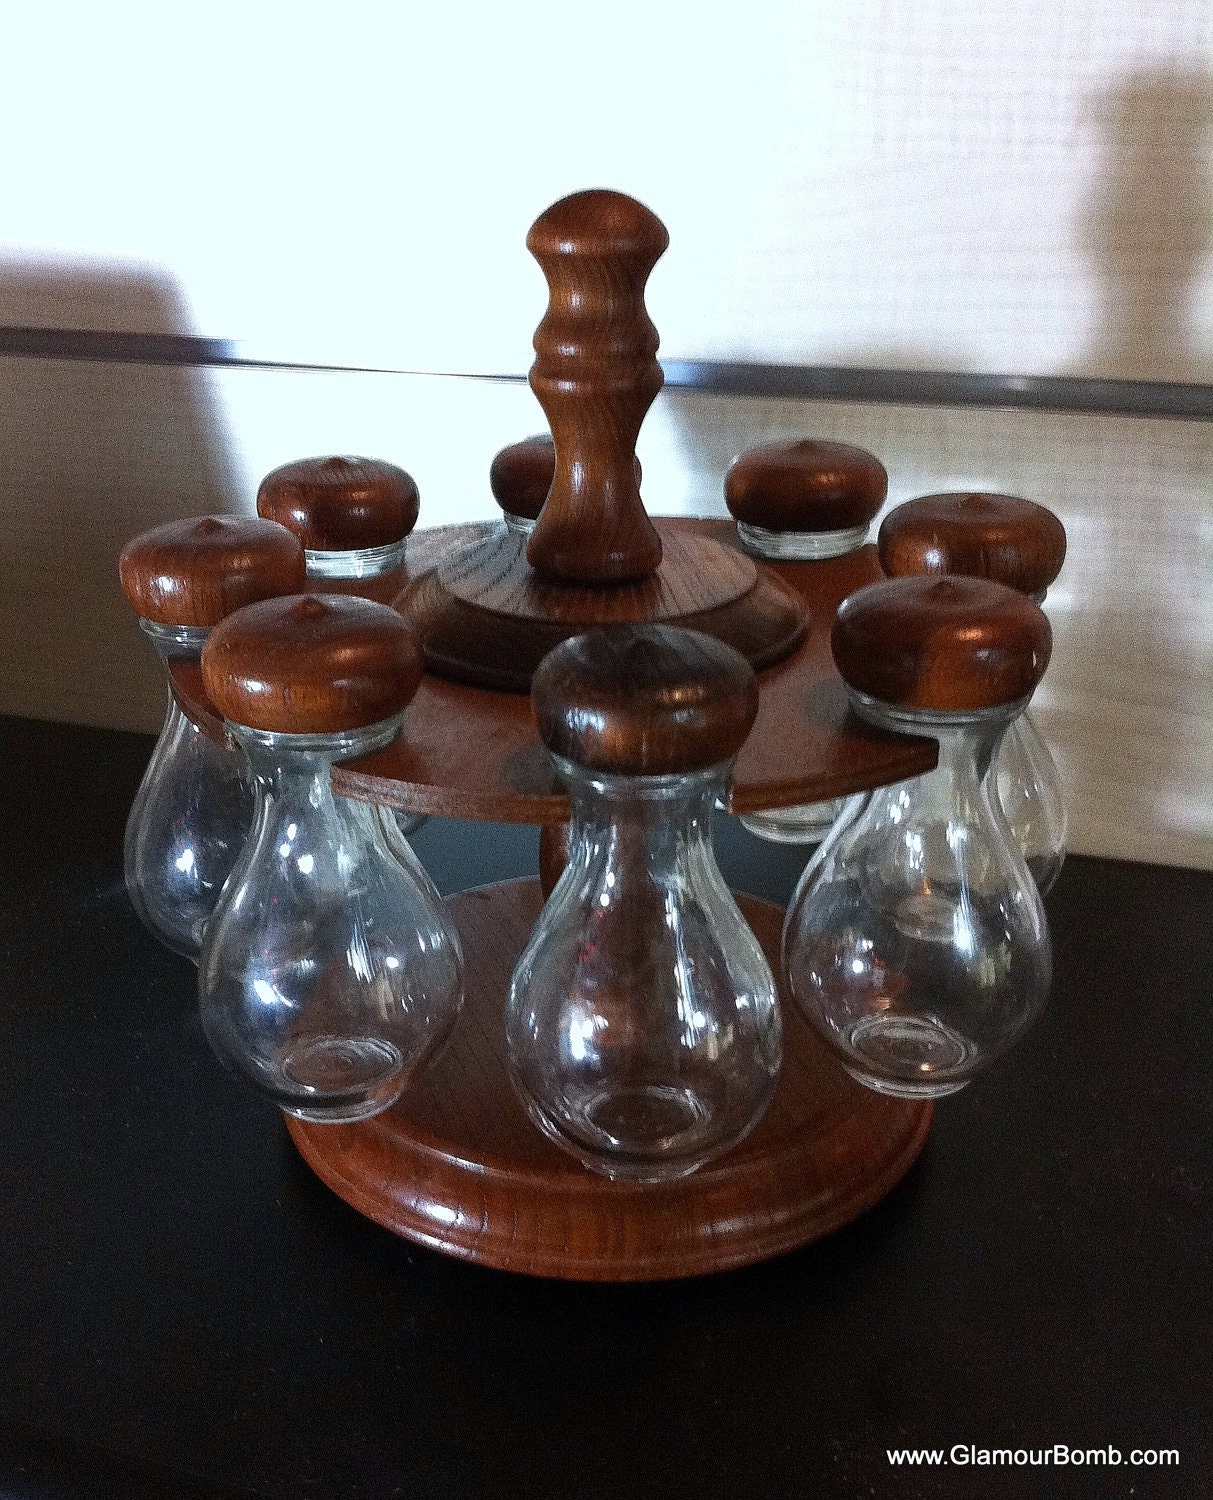 Vintage Apothecary Jar Spice Rack by Woodcrest Styson 1968 -  Wooden and Glass Set - Lazy Susan Style Kitchen Accessories Organizer